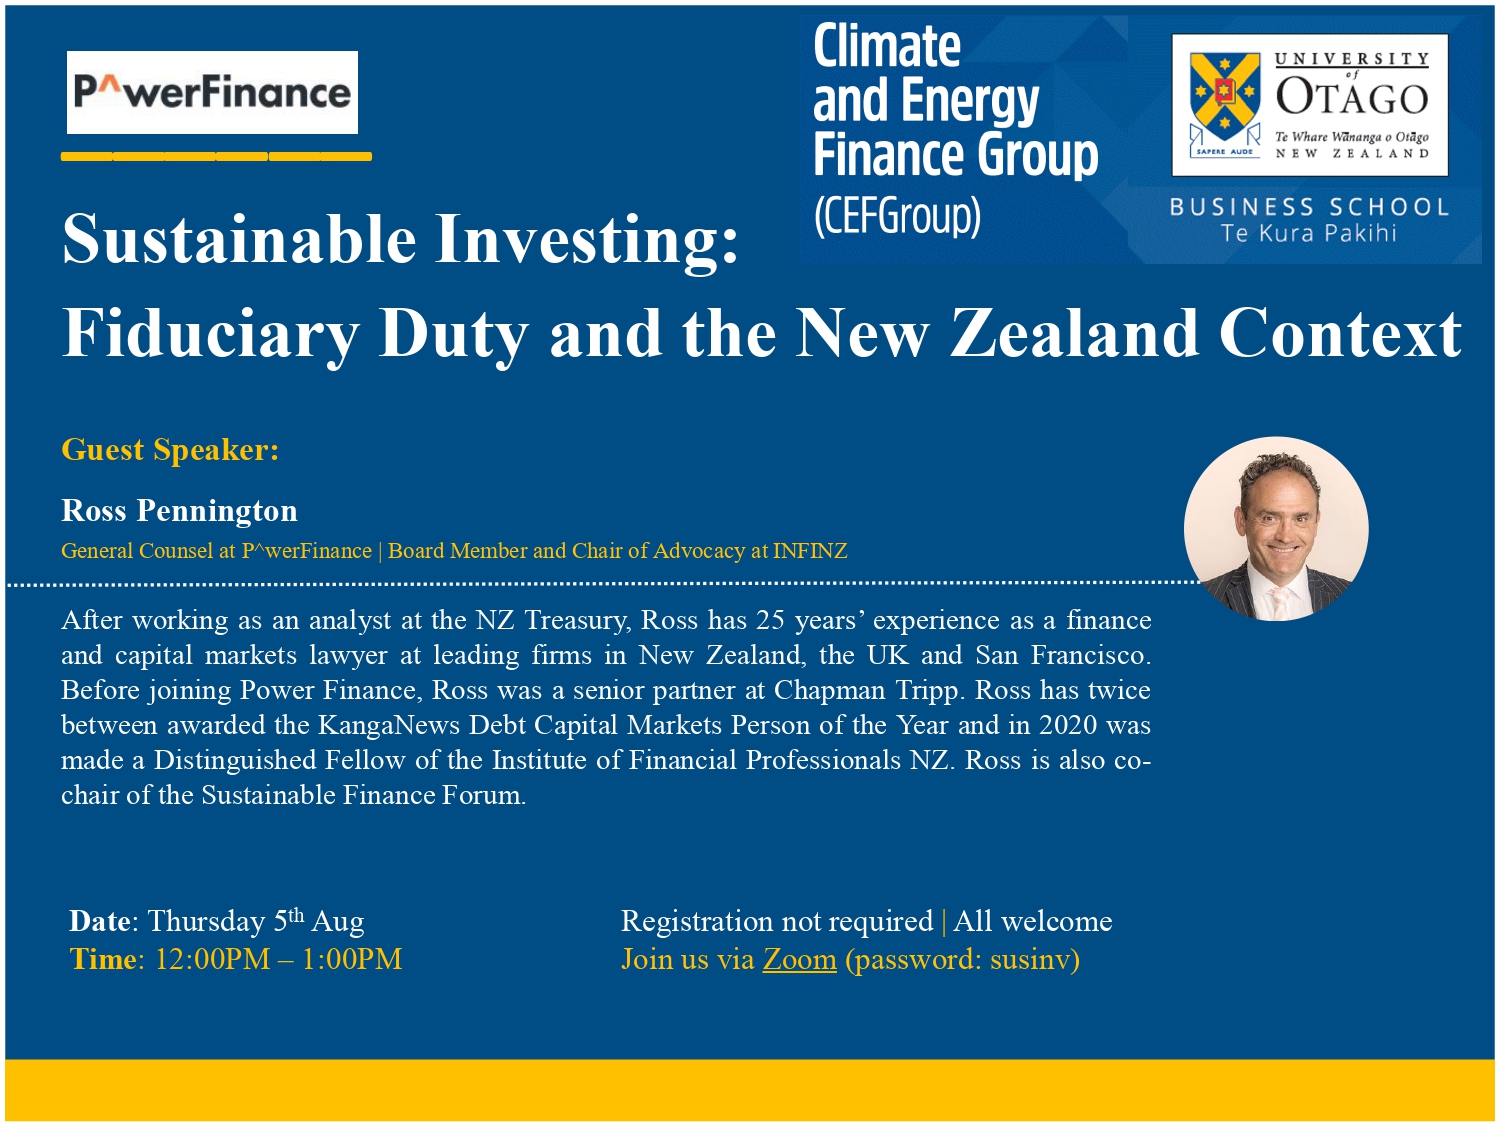 CEFGroup Webinar | Sustainable Investing: Fiduciary Duty and the New Zealand Context @ Burns 7 Seminar Room